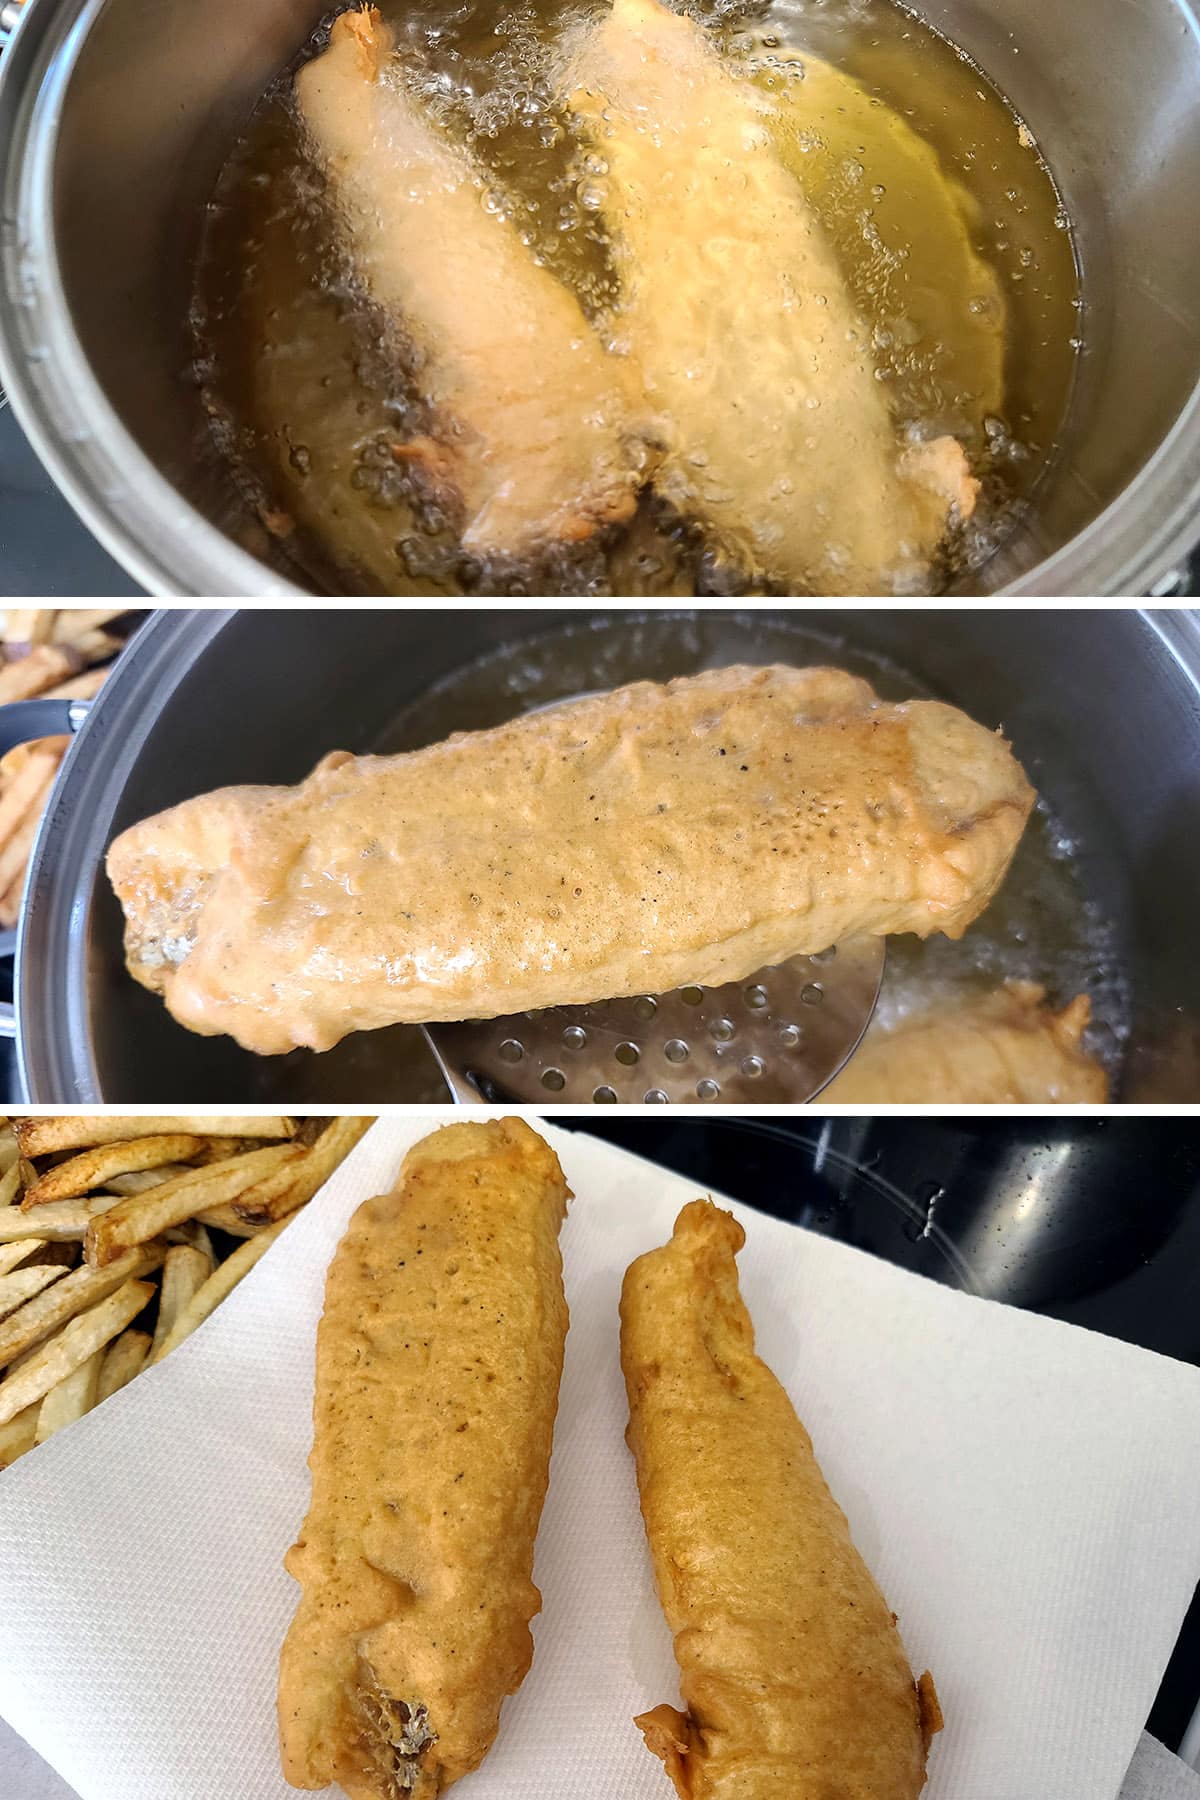 A 3 part image showing 2 pieces of battered gluten free fried fish frying in oil, being removed with a slotted spoon, then resting on paper towels.